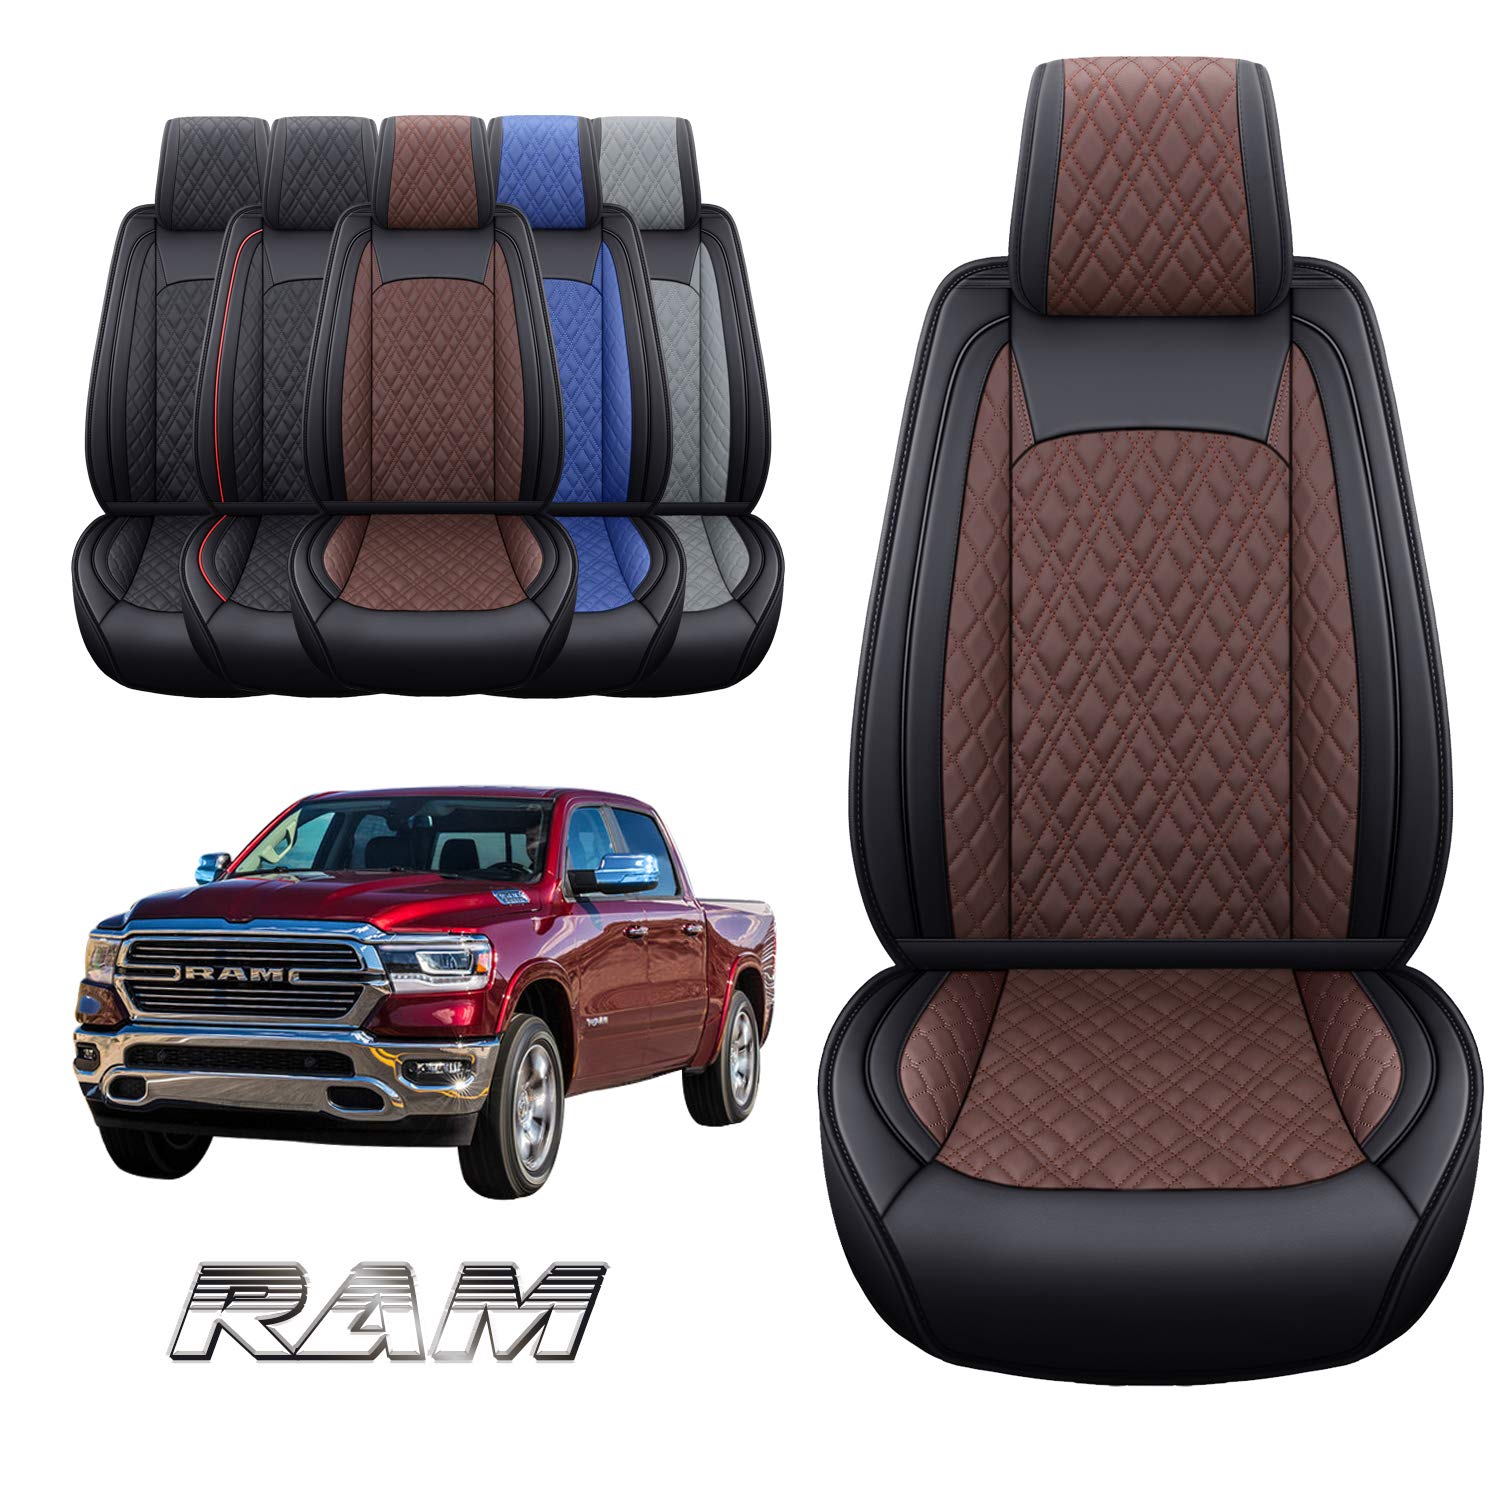 YIERTAI car Seat covers compatible with Dodge Ram custom Fit 2009-2023 1500 2500 3500 Pickup Bighorn Mega cab Limited Longhorn L